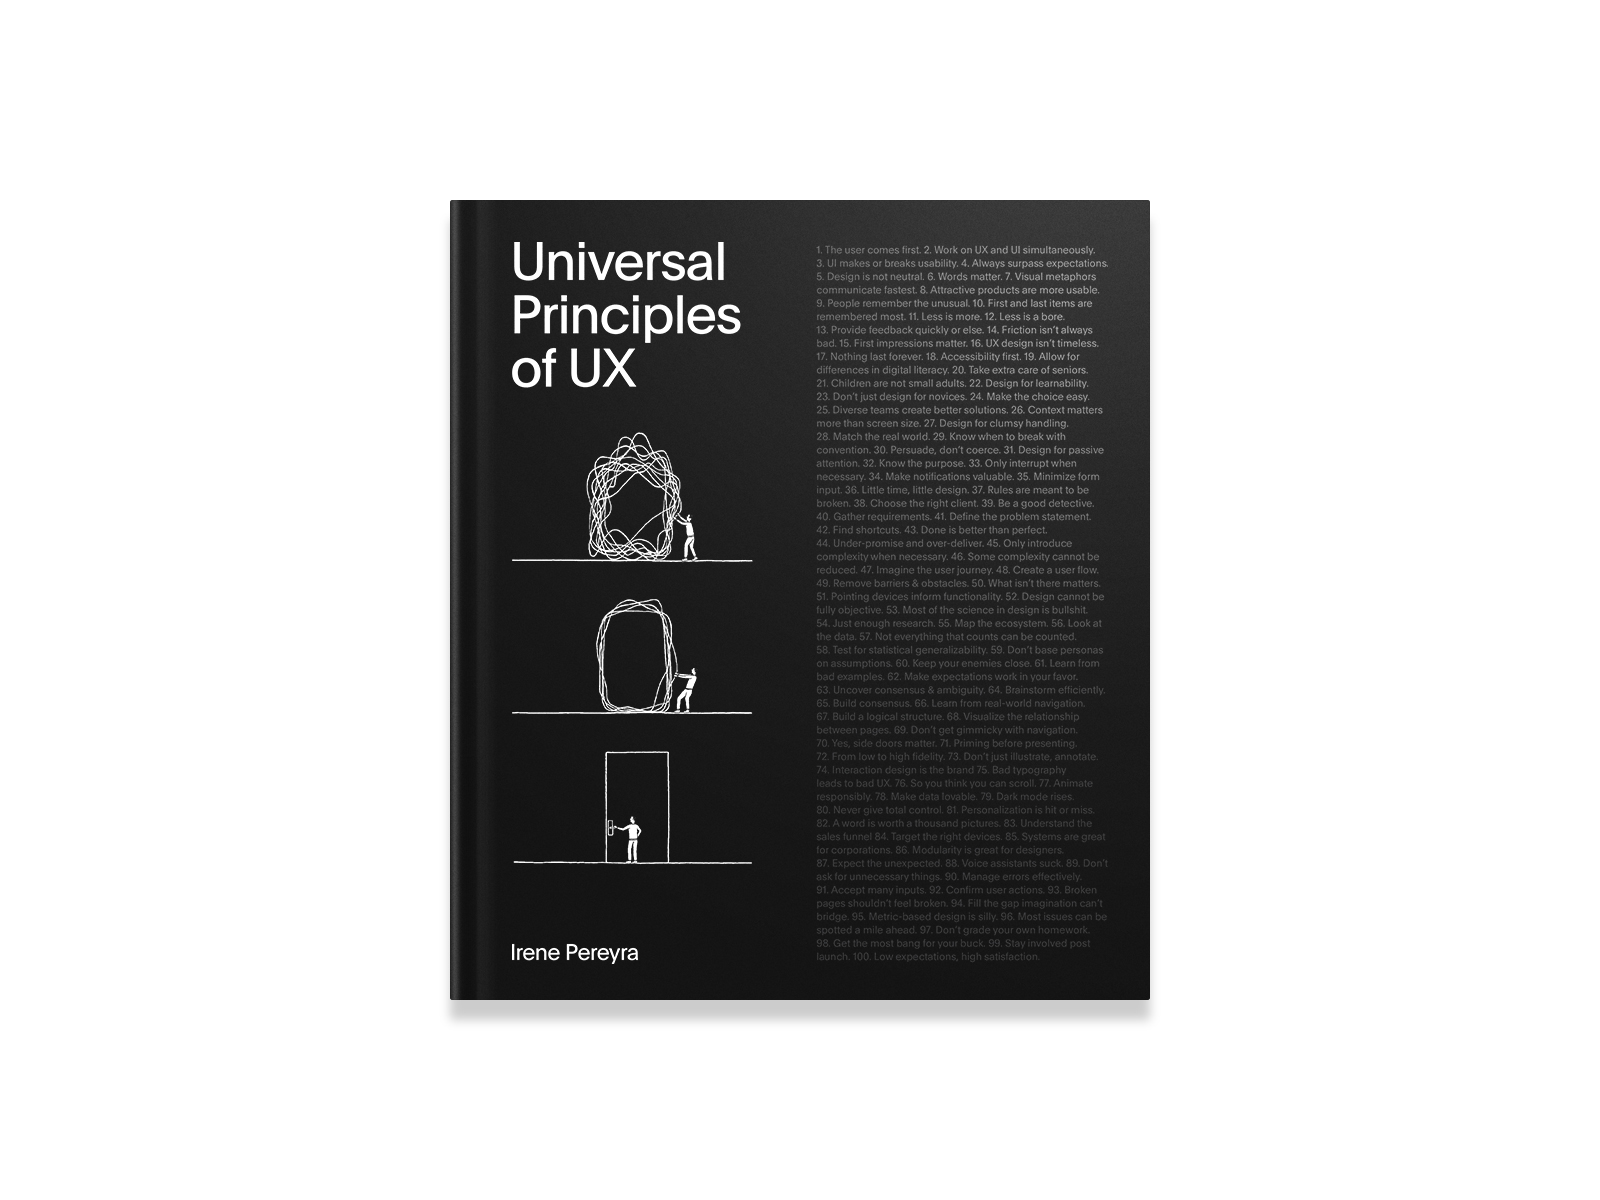 Universal Principles of UX: 100 Timeless Strategies to Create Positive Interactions between People and Technology, by Irene Pereyra